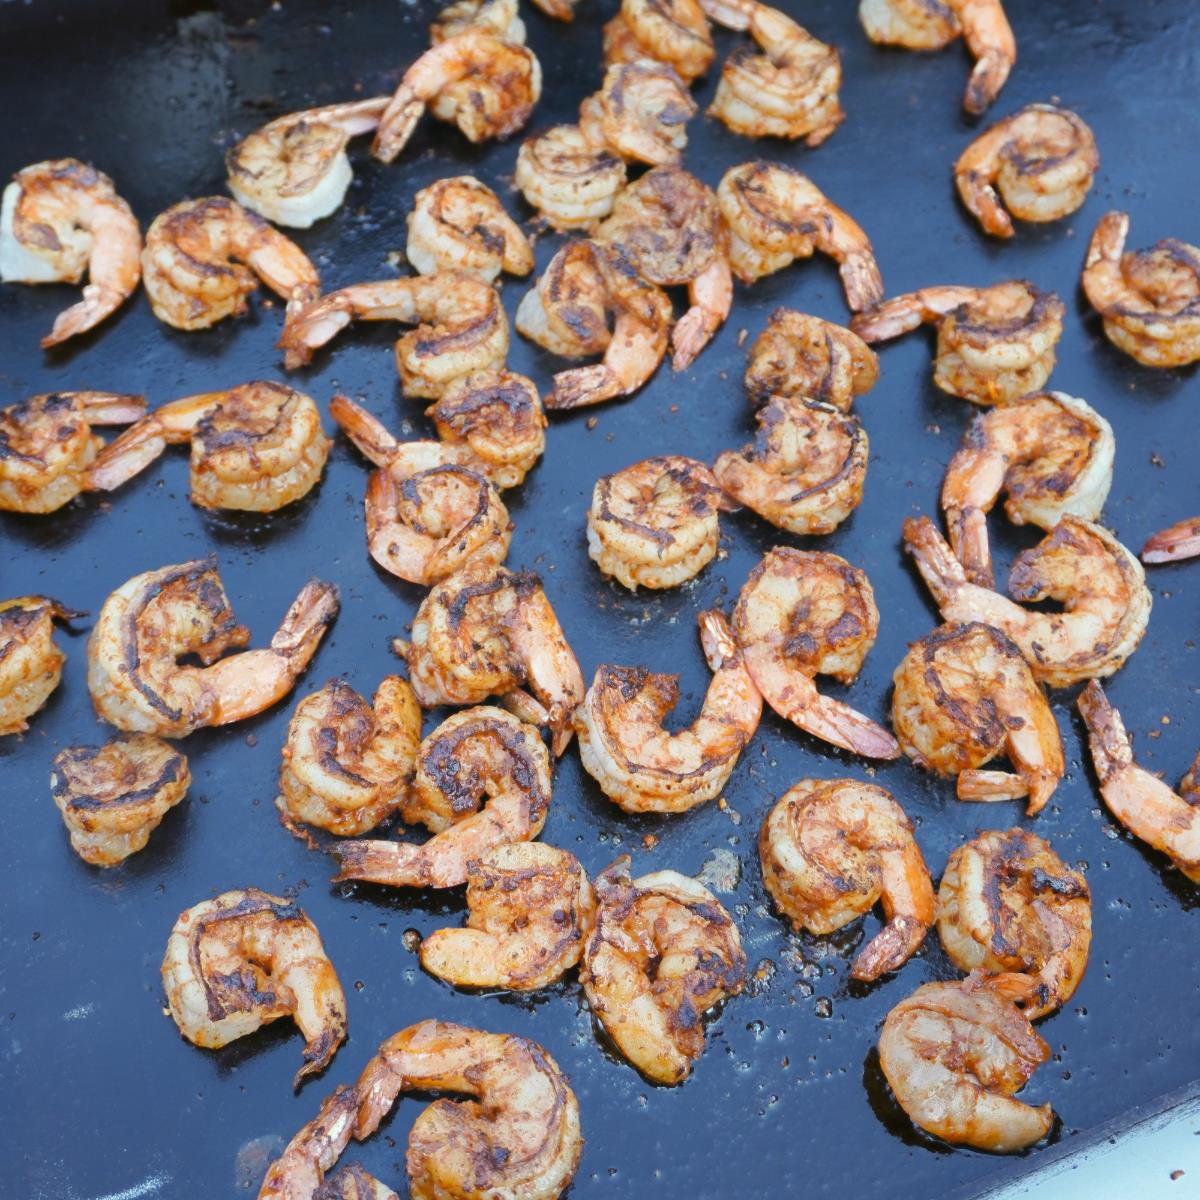 Grilled Shrimp with Spicy Mayo Sauce